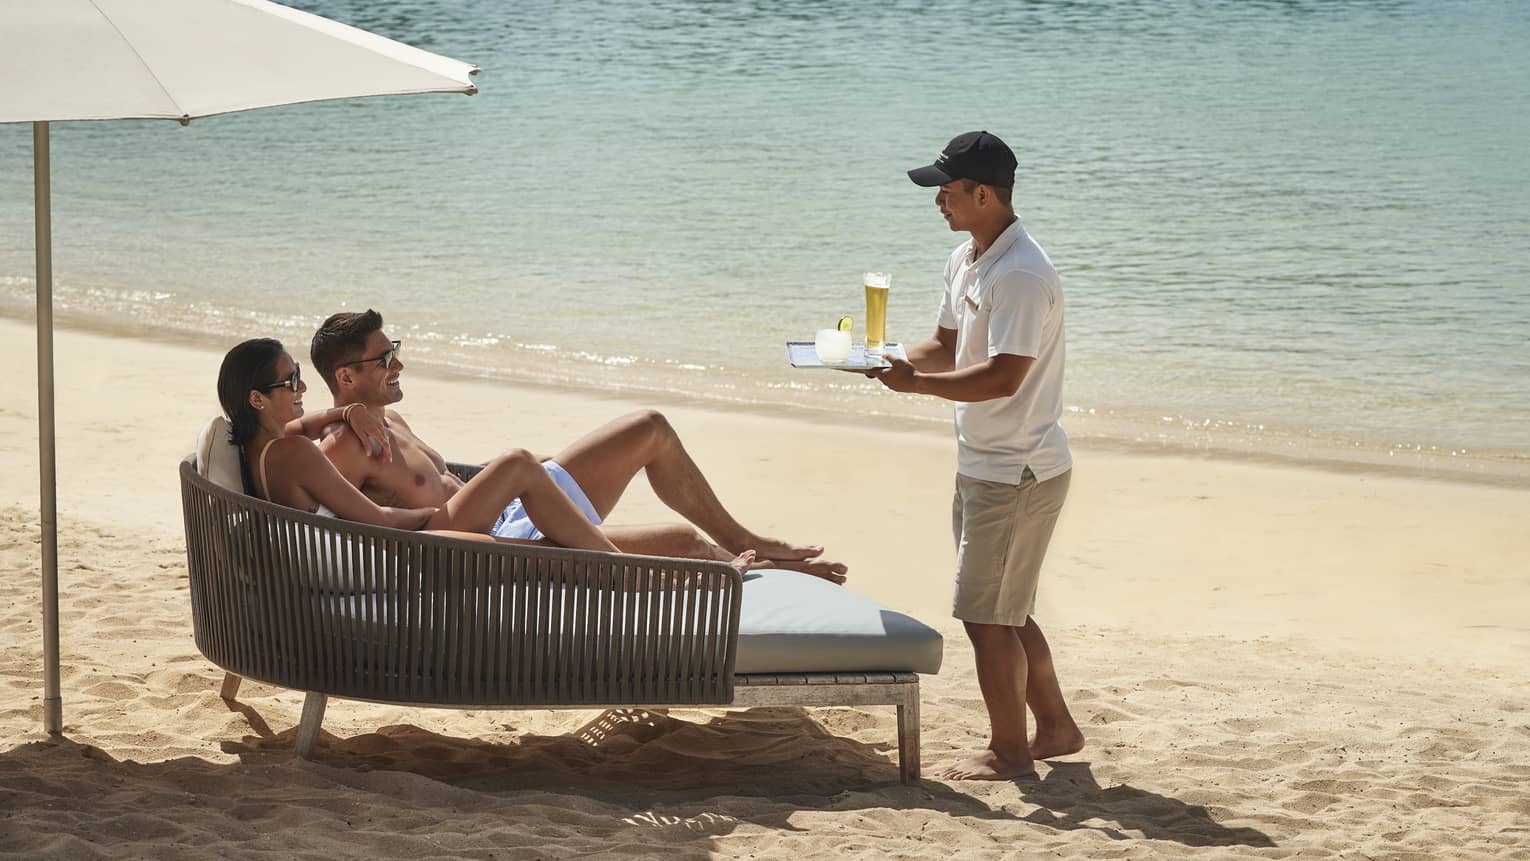 A couple lounges on a daybed on the beach while a beach attendant brings them cocktails on a tray